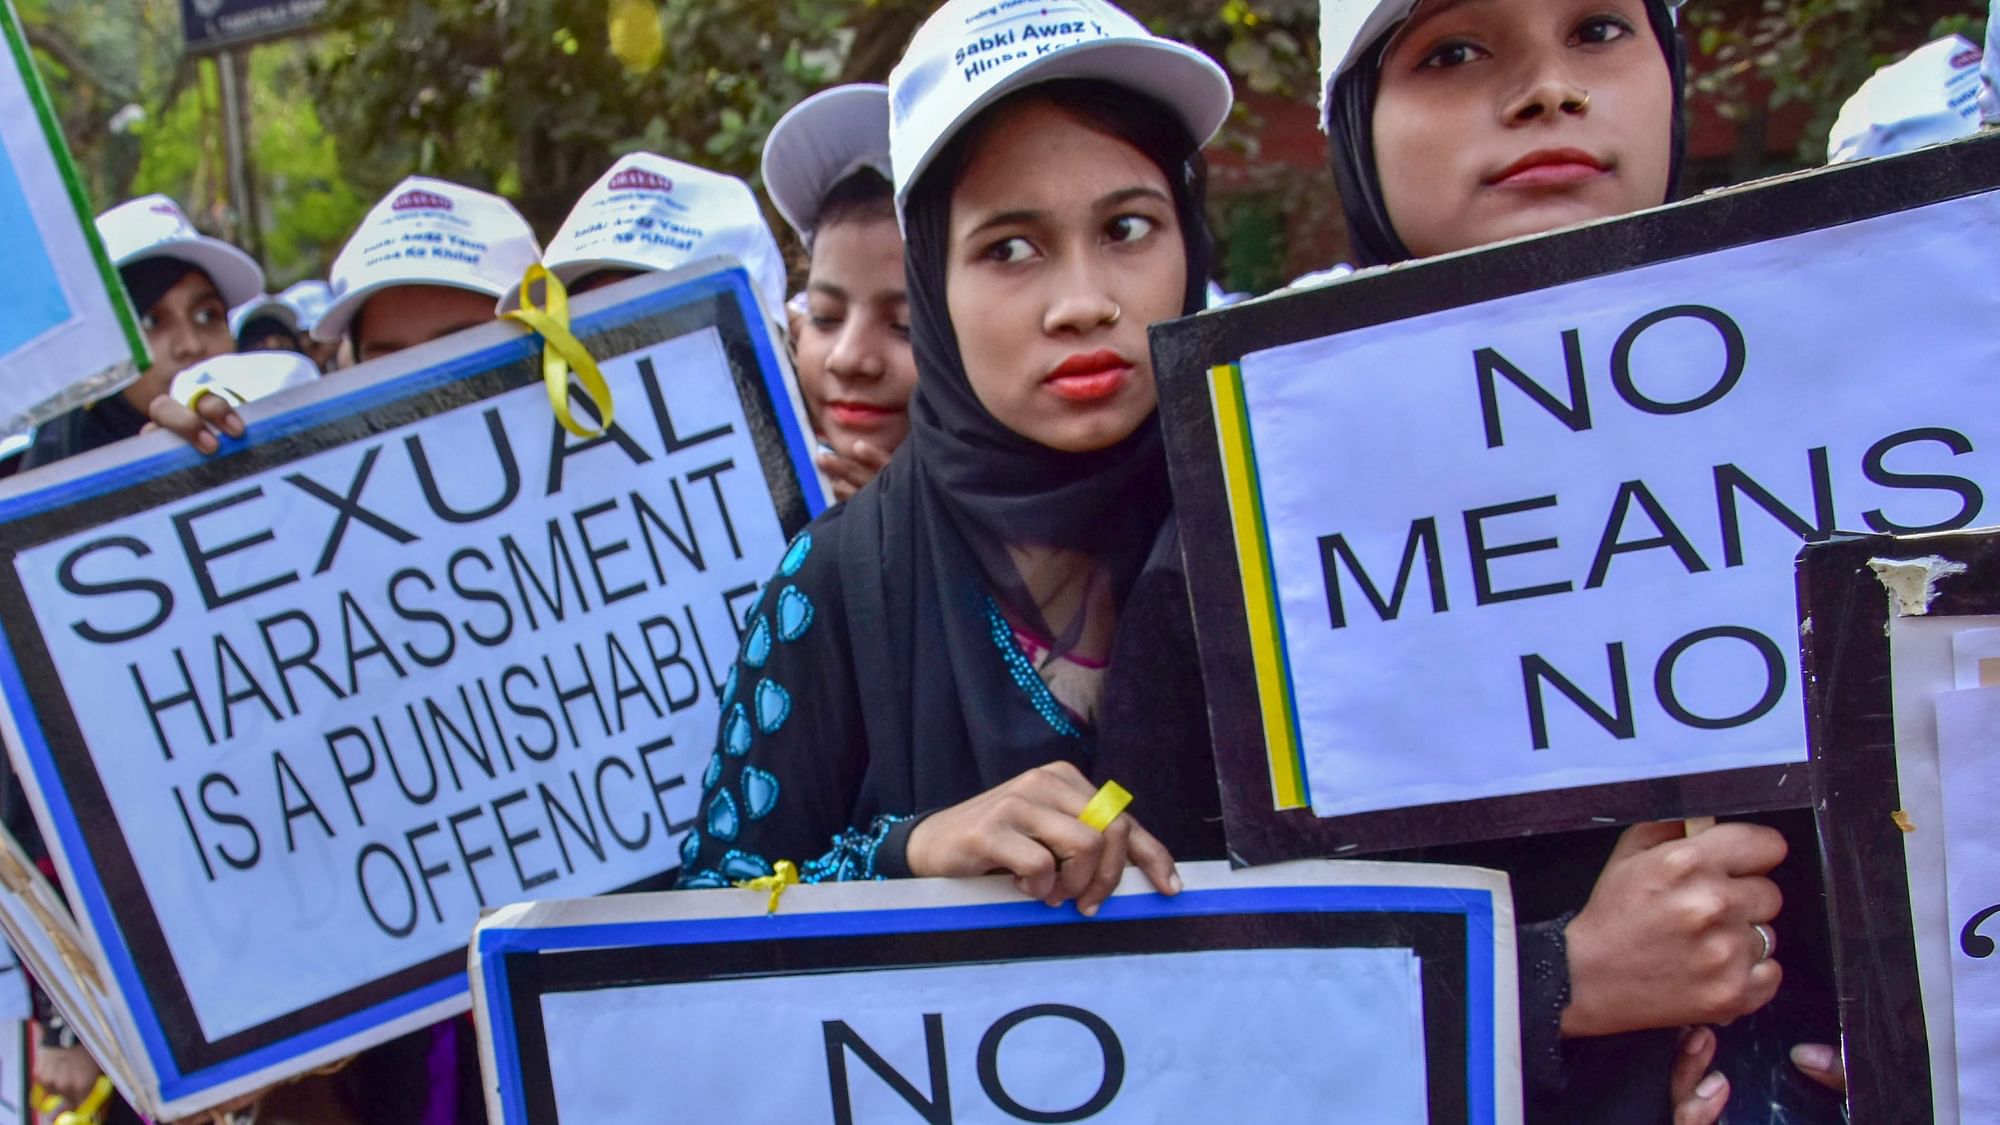 Image of women protesting sexual harassment used for representational purpose.